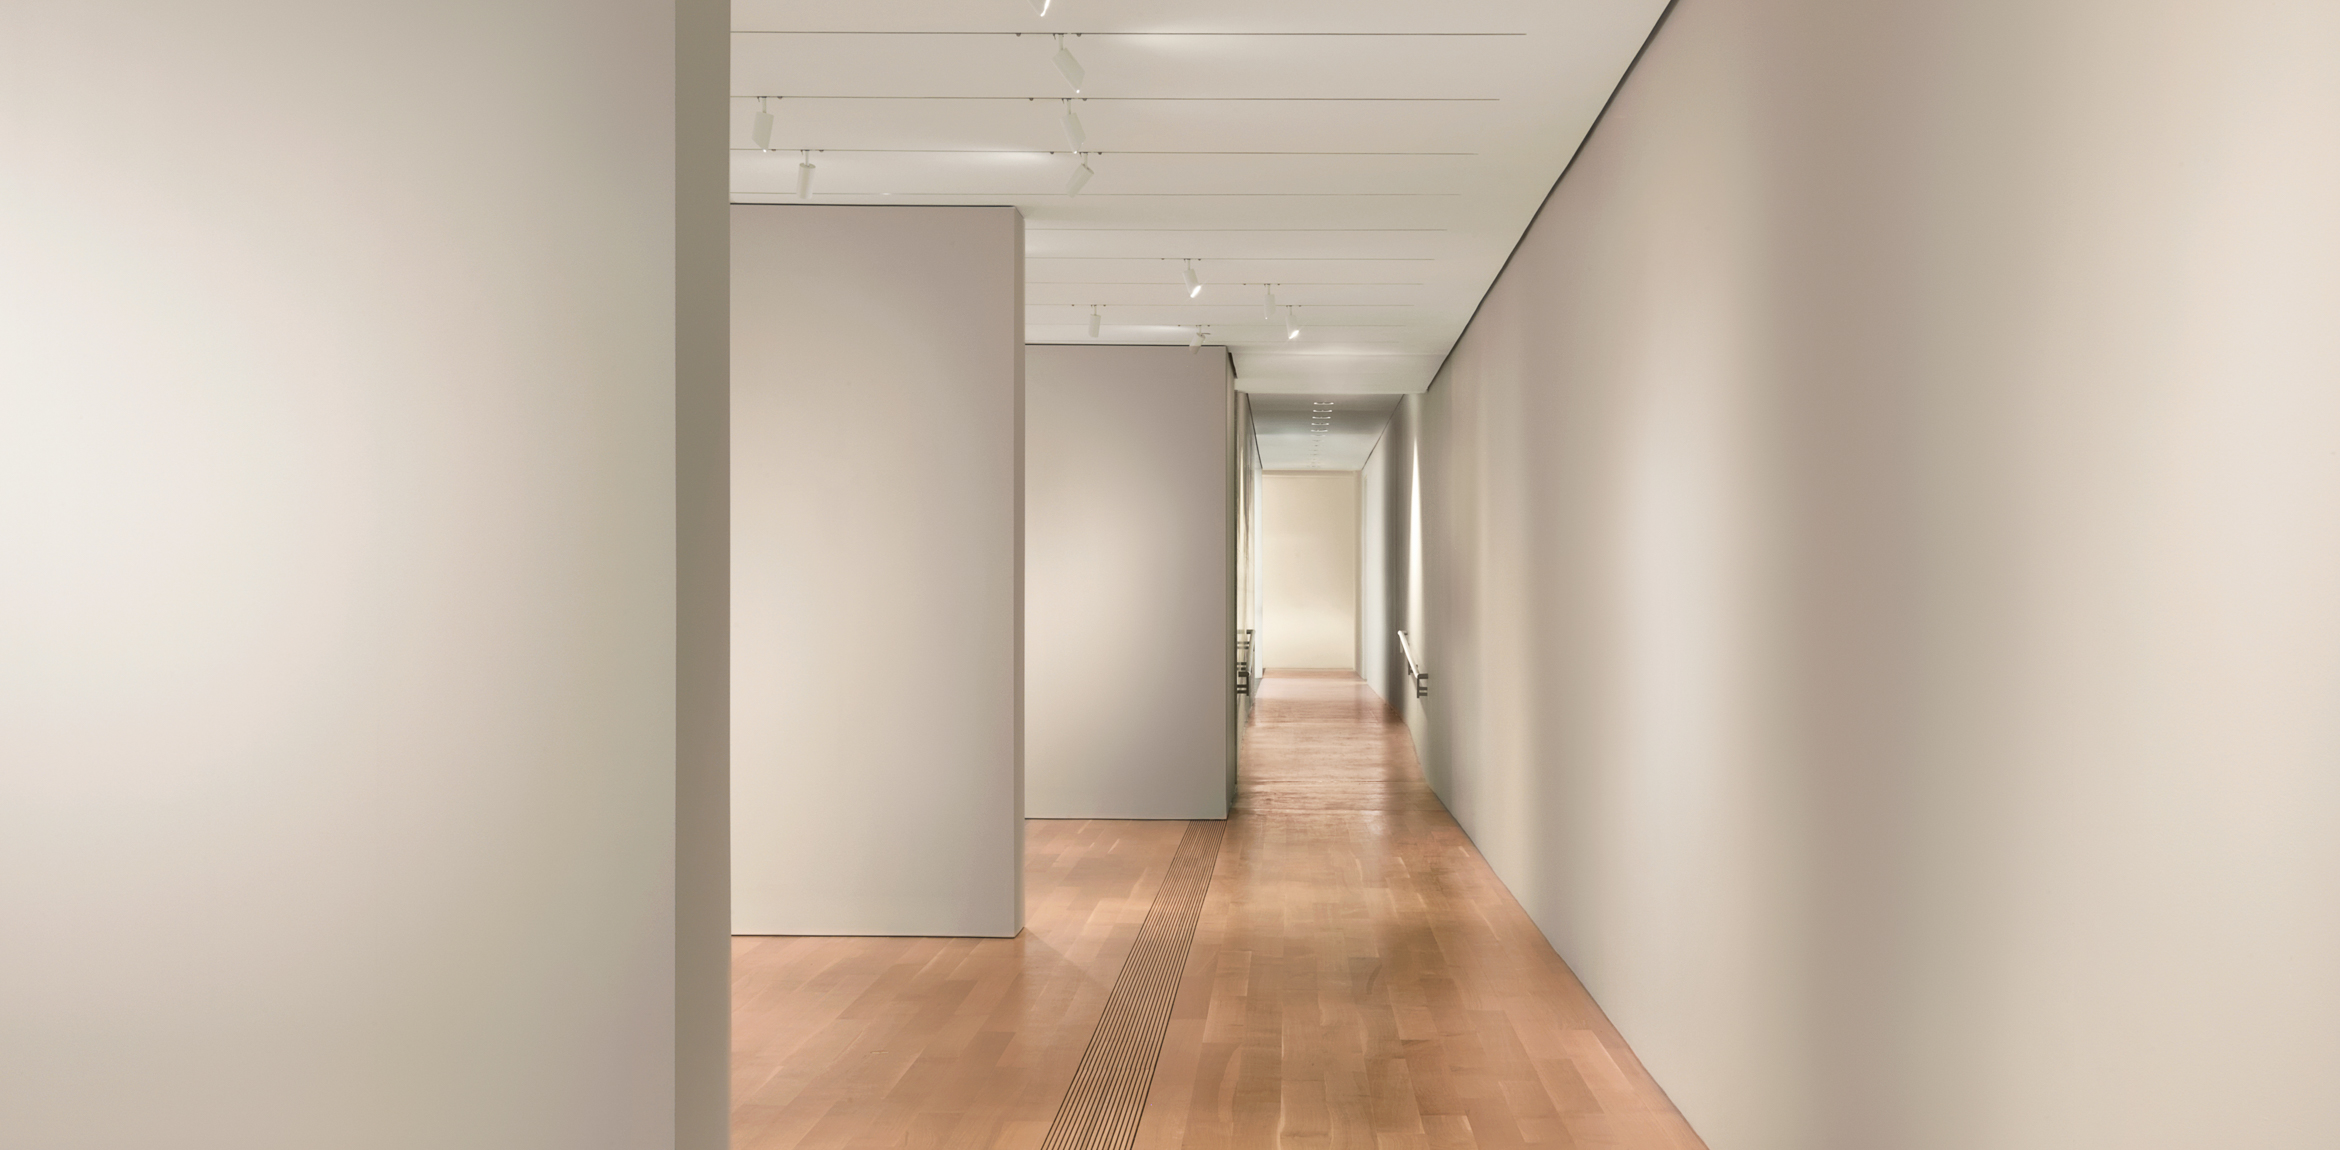 A view of the newly renovated Lower East Gallery and Lower corridor.